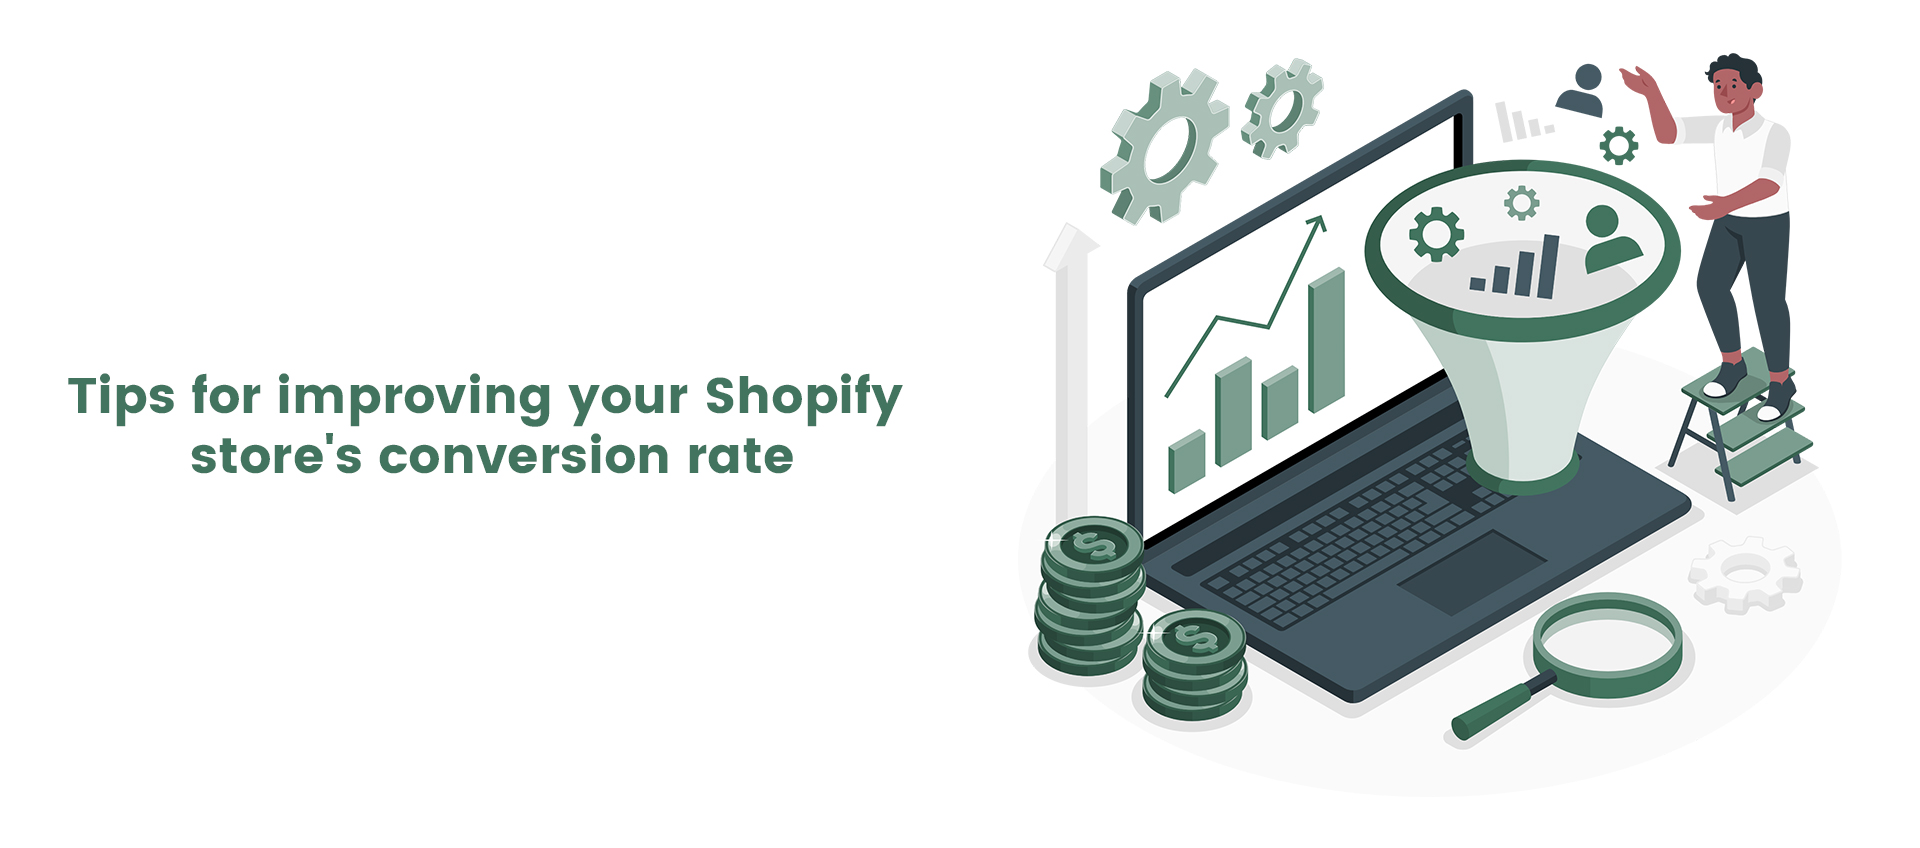 Tips and best practices for starting and growing an online store.